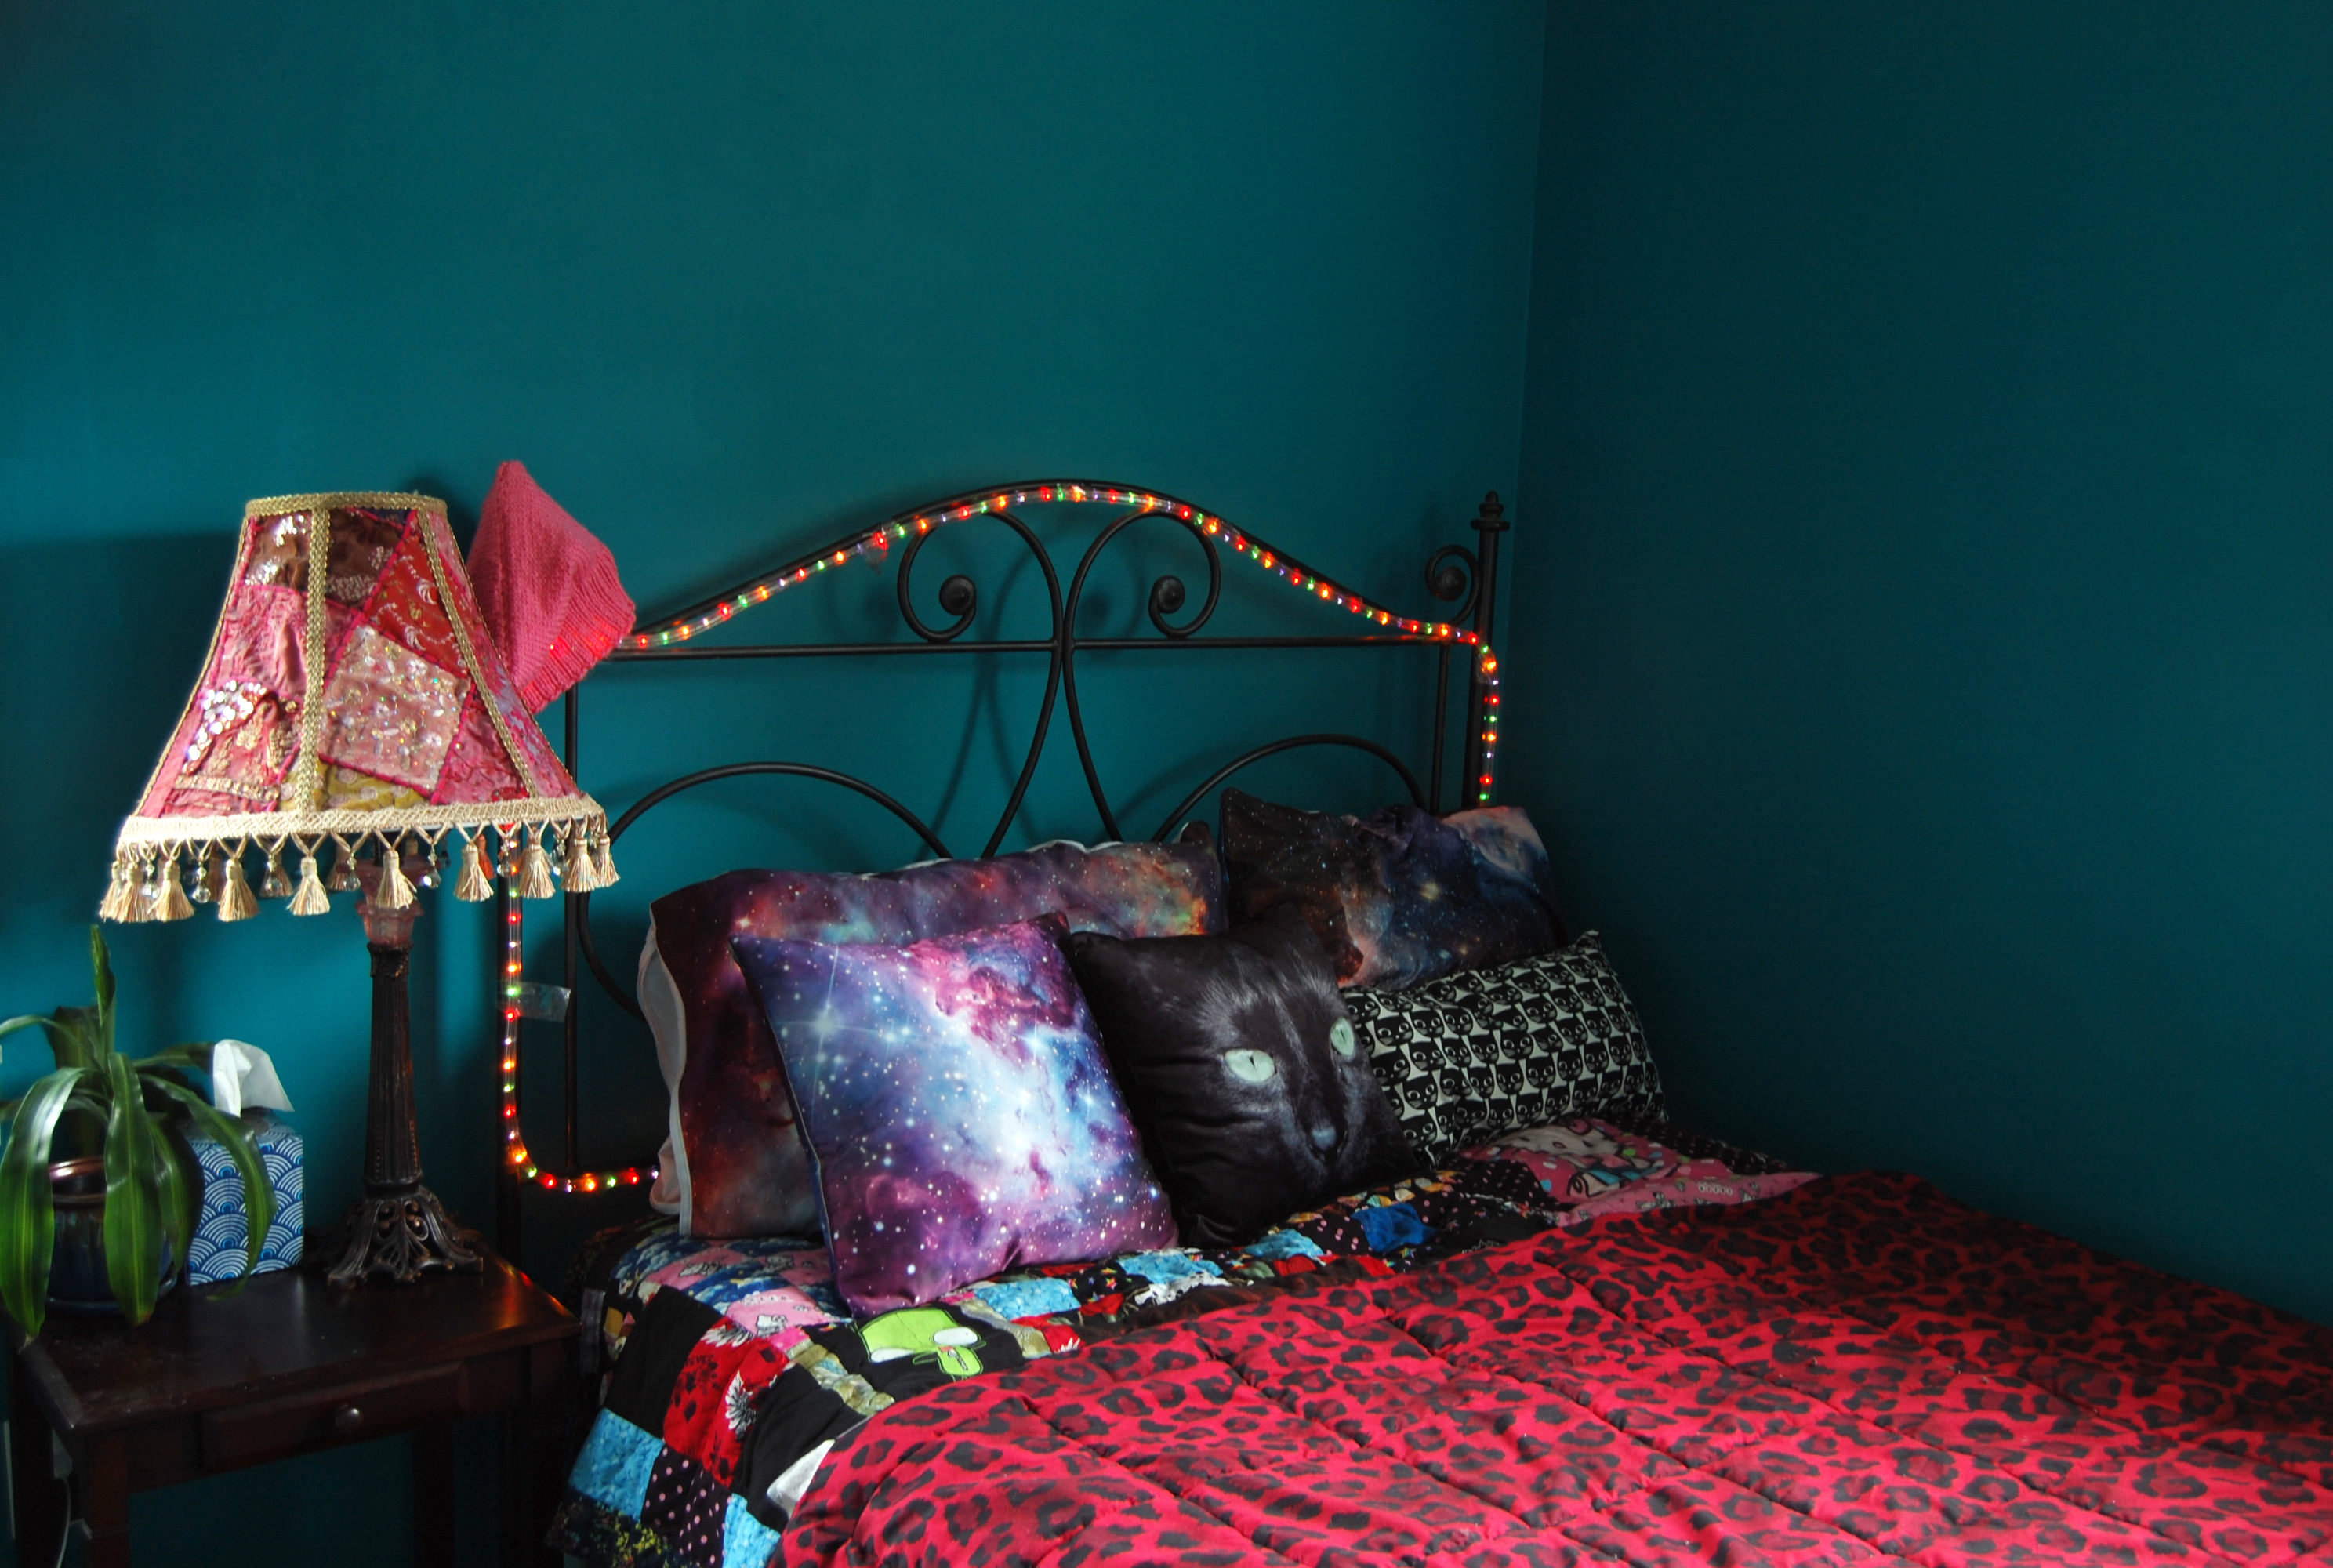 A quirky made bed with lots of pillows next to a colorful lamp in a teal bedroom